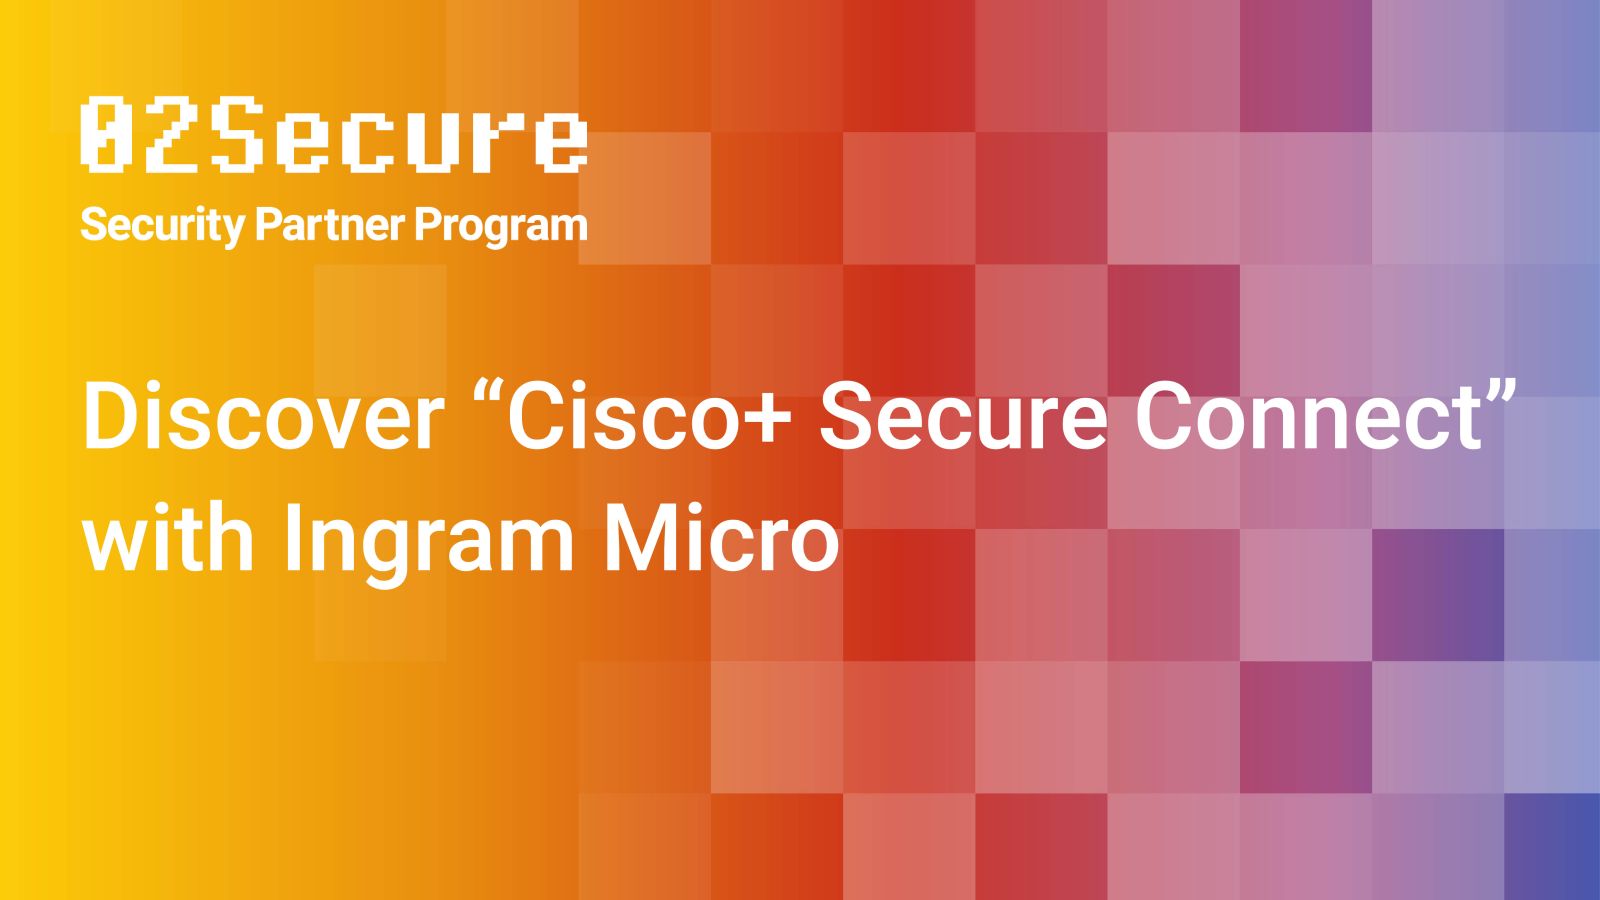 02Secure - Discover "Cisco+ Secure Connect" with Ingram Micro Featured Image